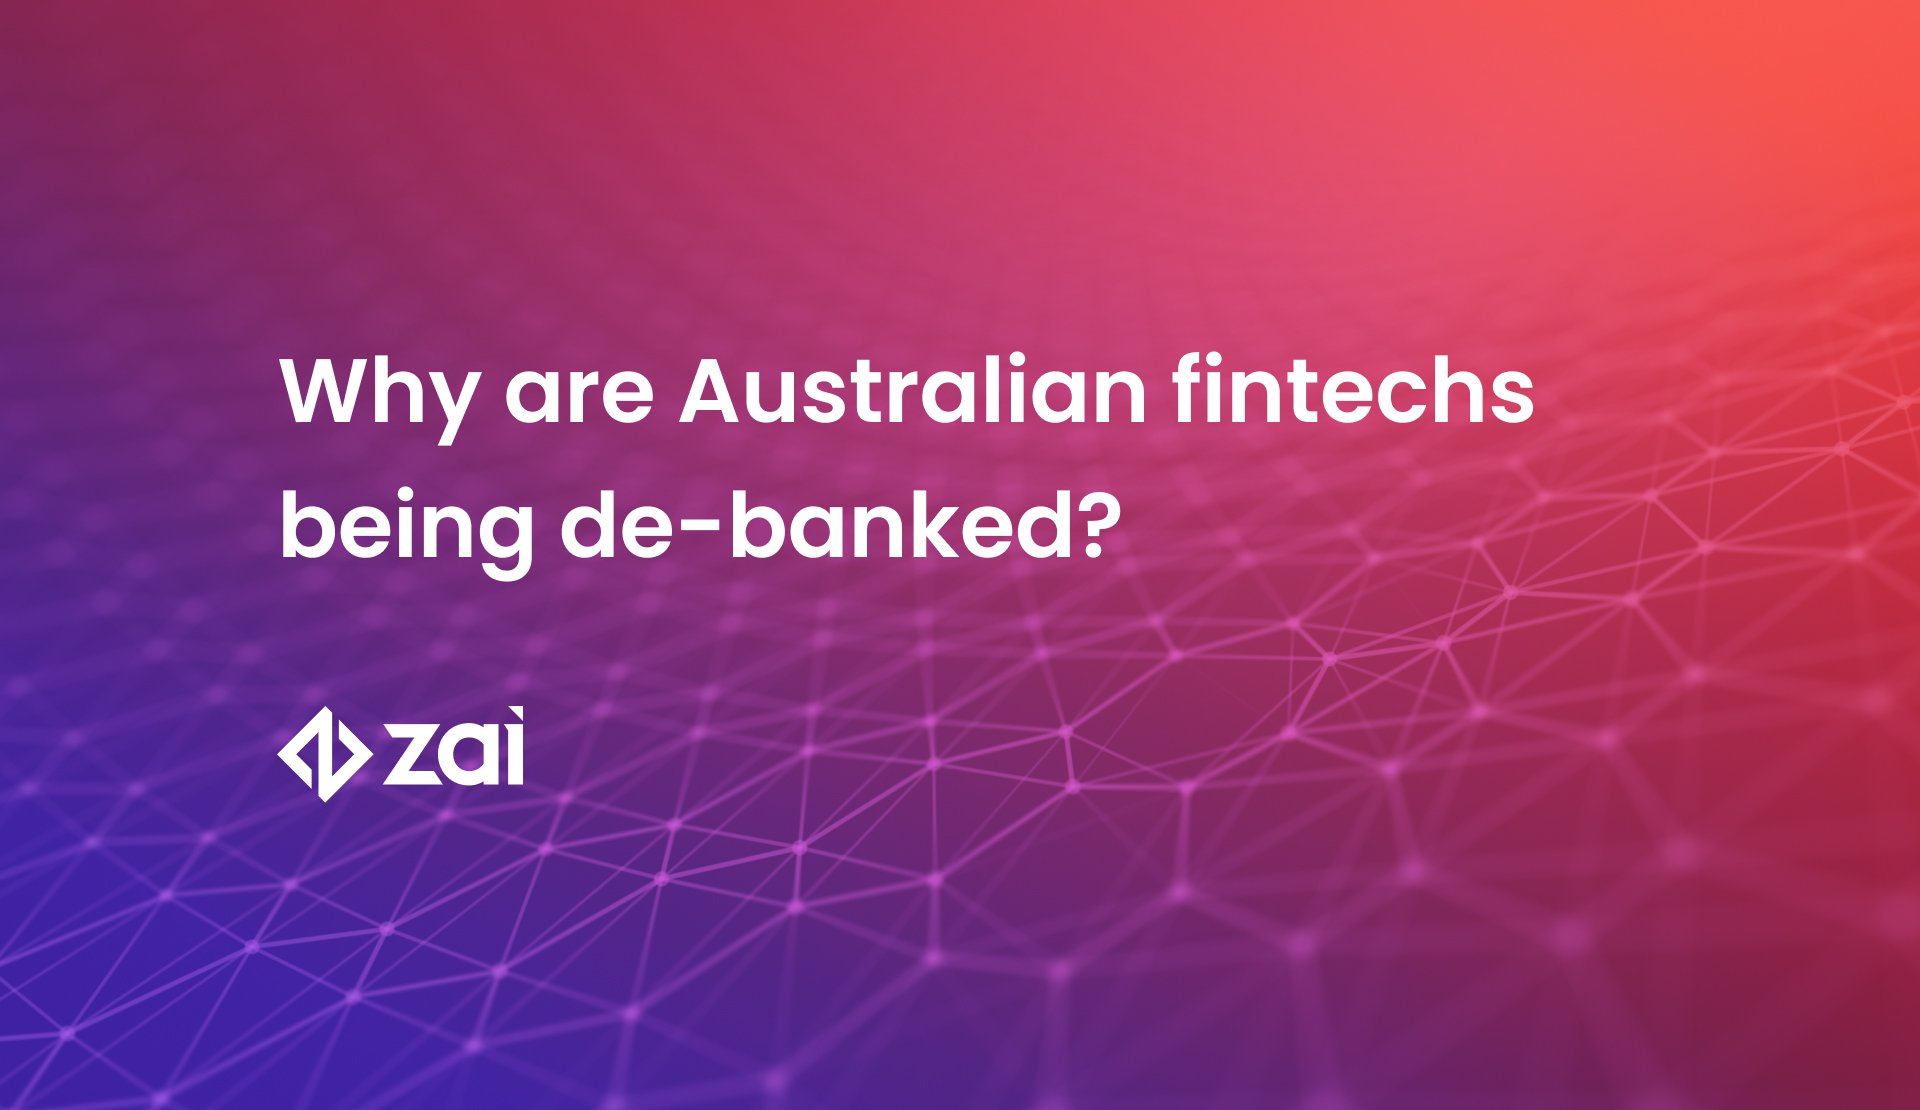 Why are Australian fintechs being de-banked?